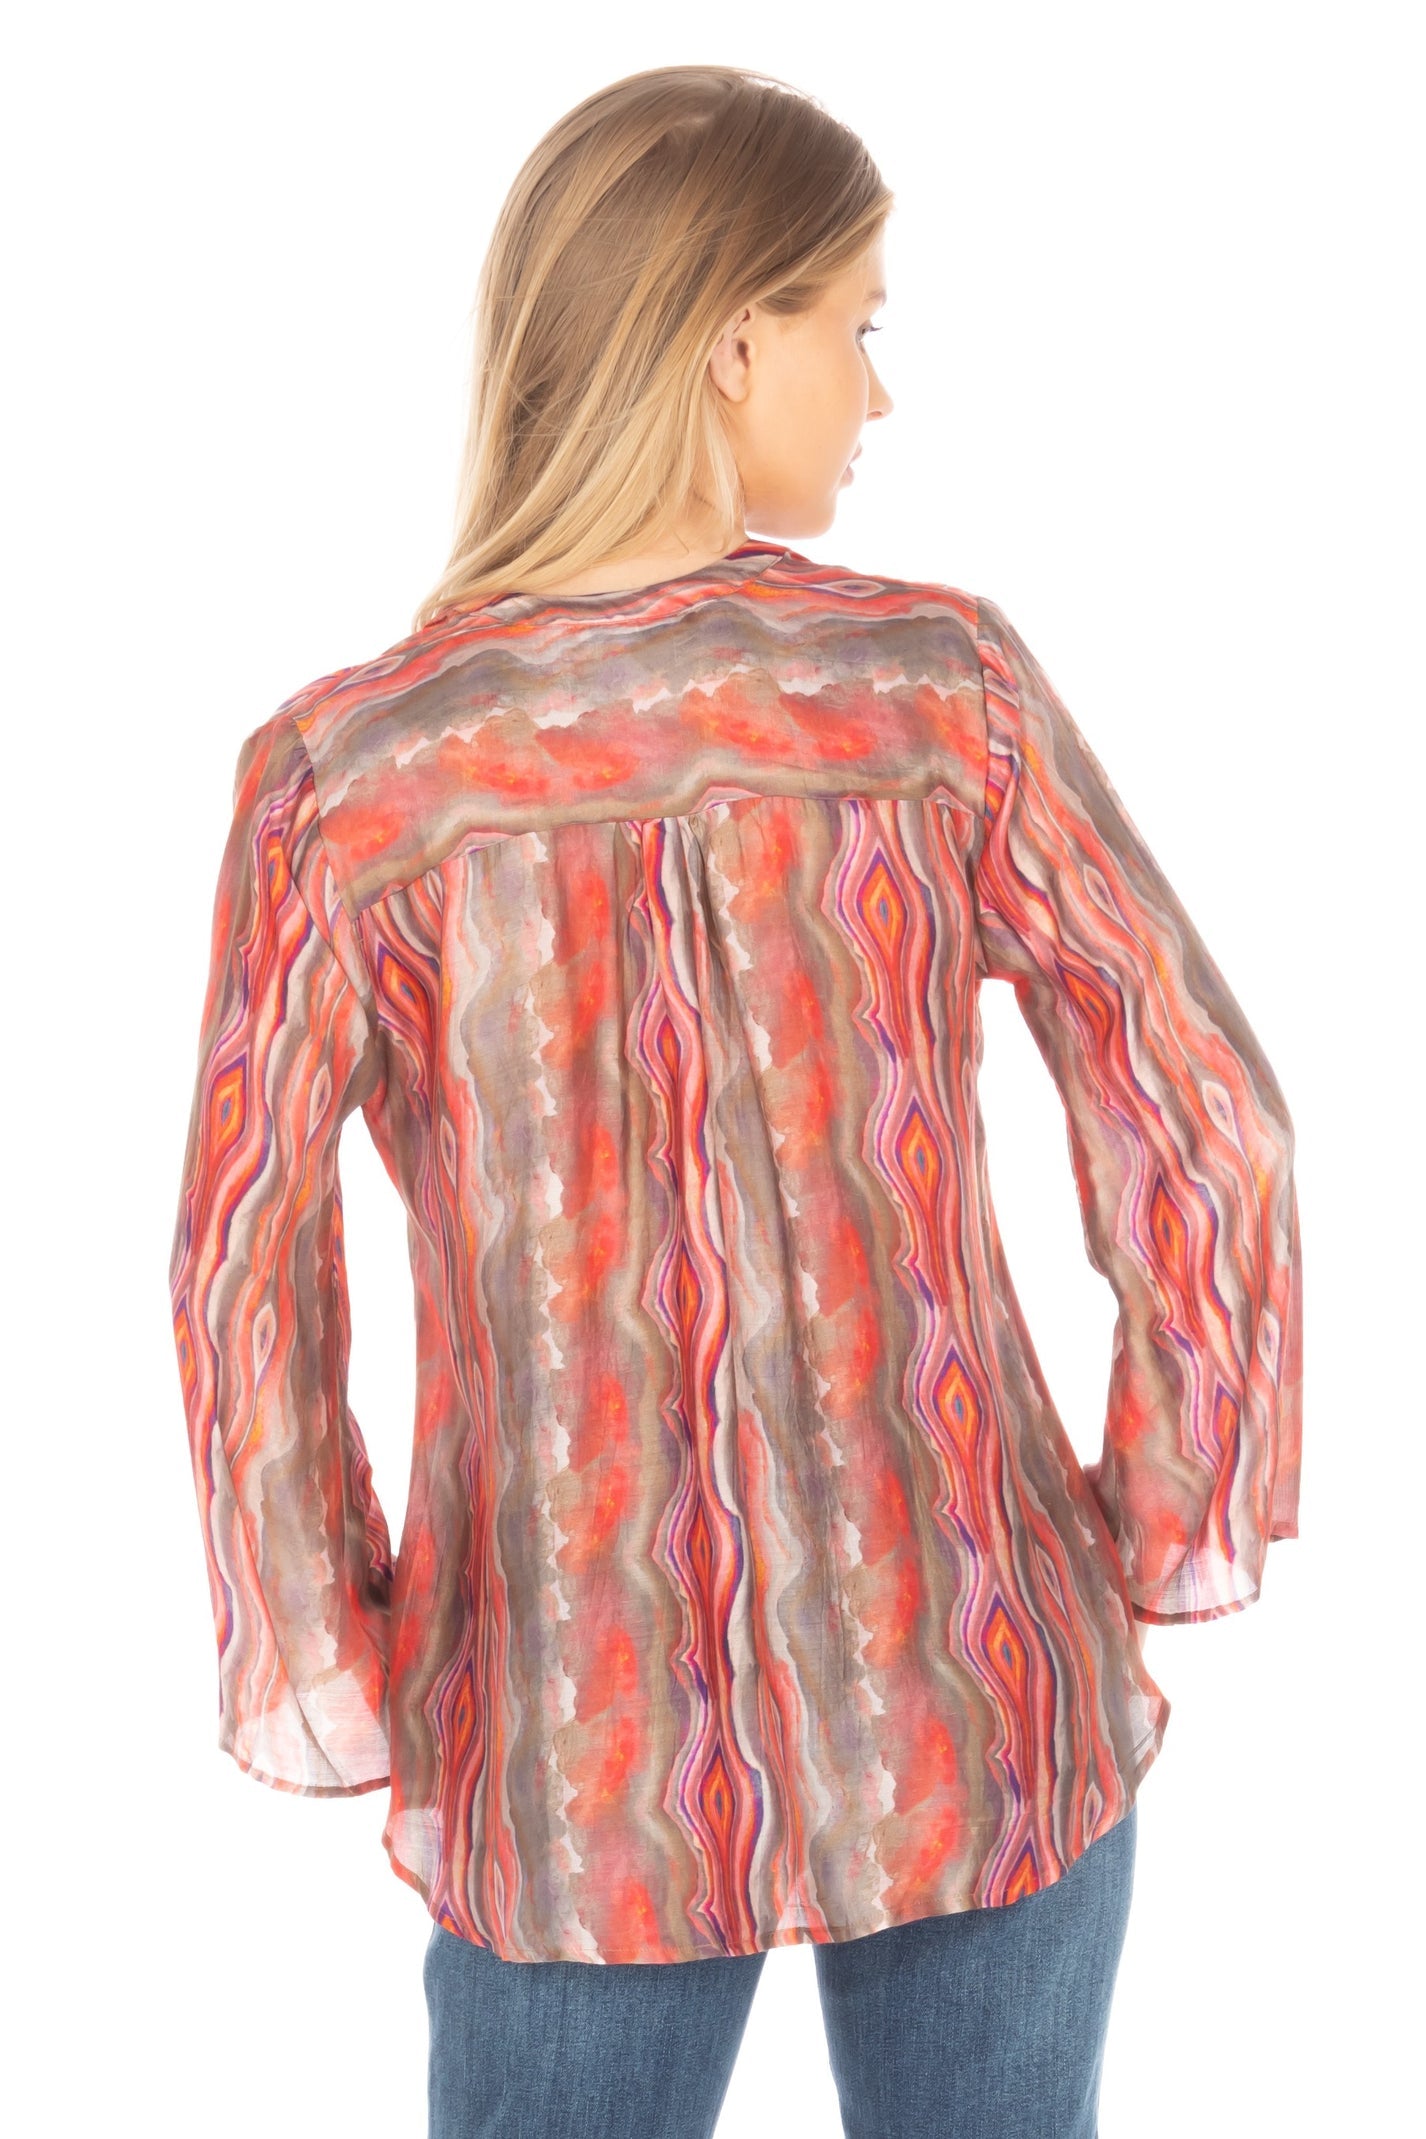 APNY Ladies V-Neck Blouse With Tassel and Bell Sleeves